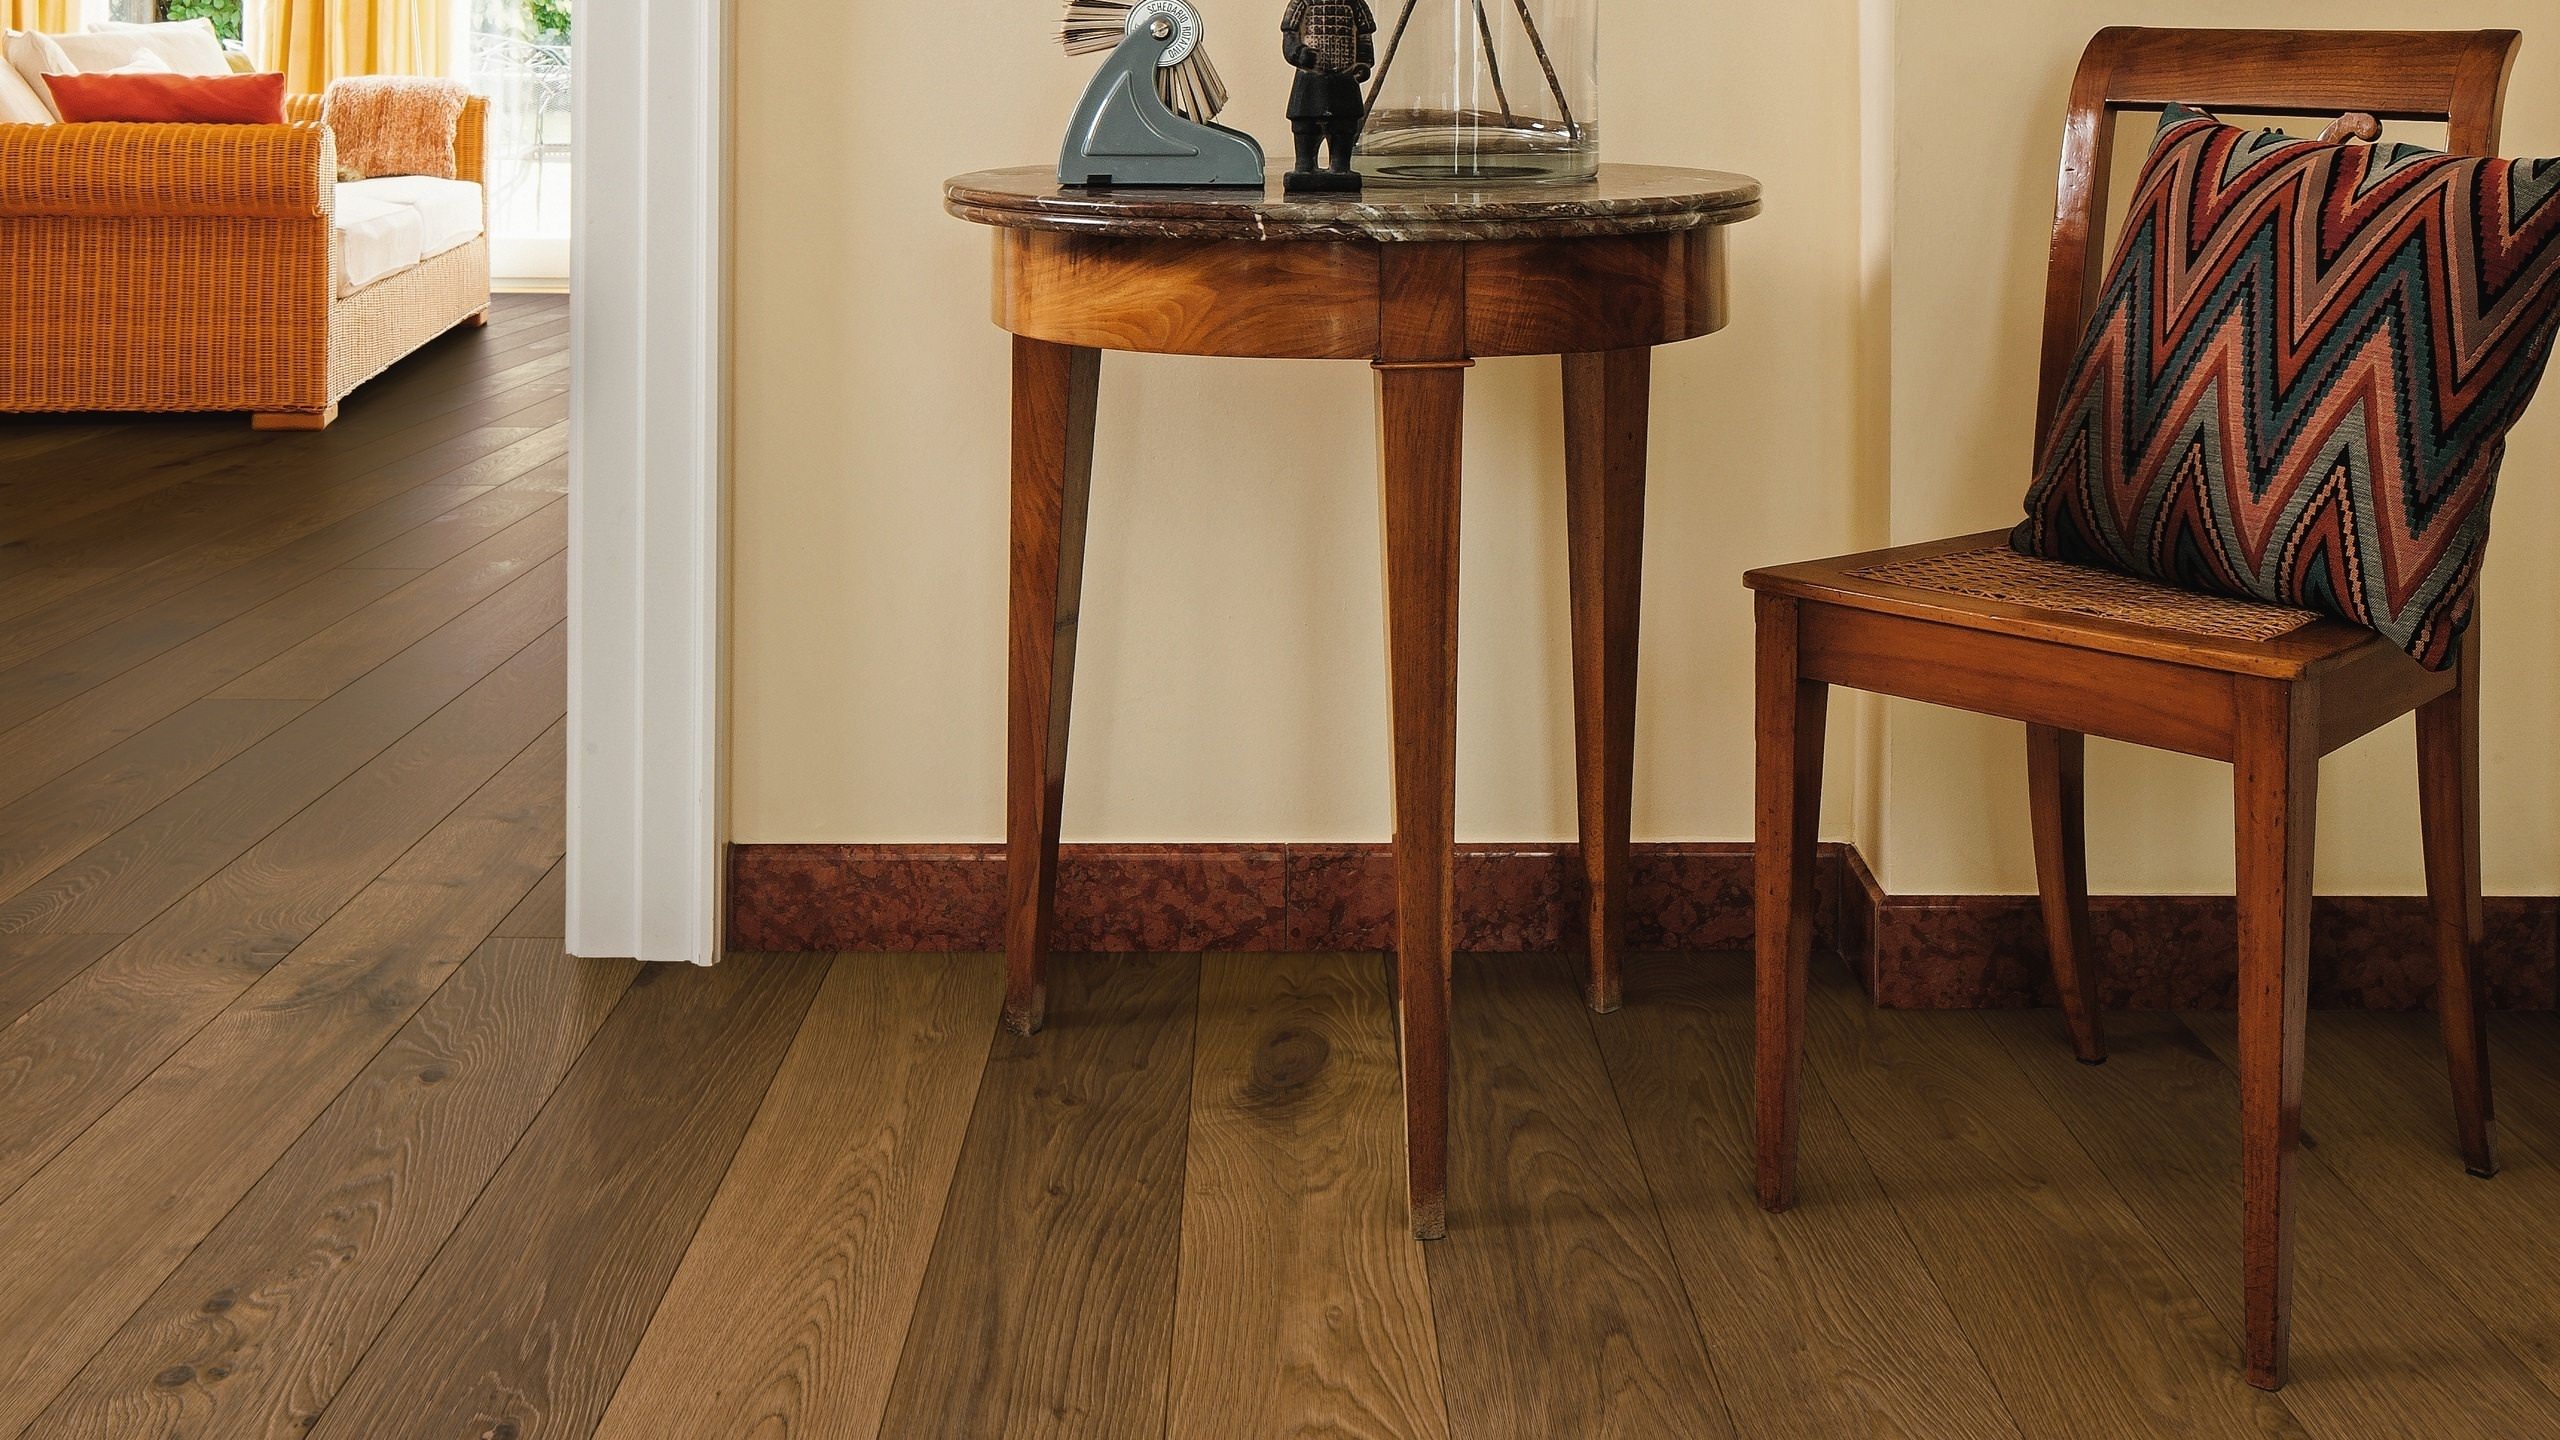 HARO PARQUET 4000 Plank 1-Strip 180 4V Smoked Oak Sauvage retro brushed naturaLin plus Top Connect